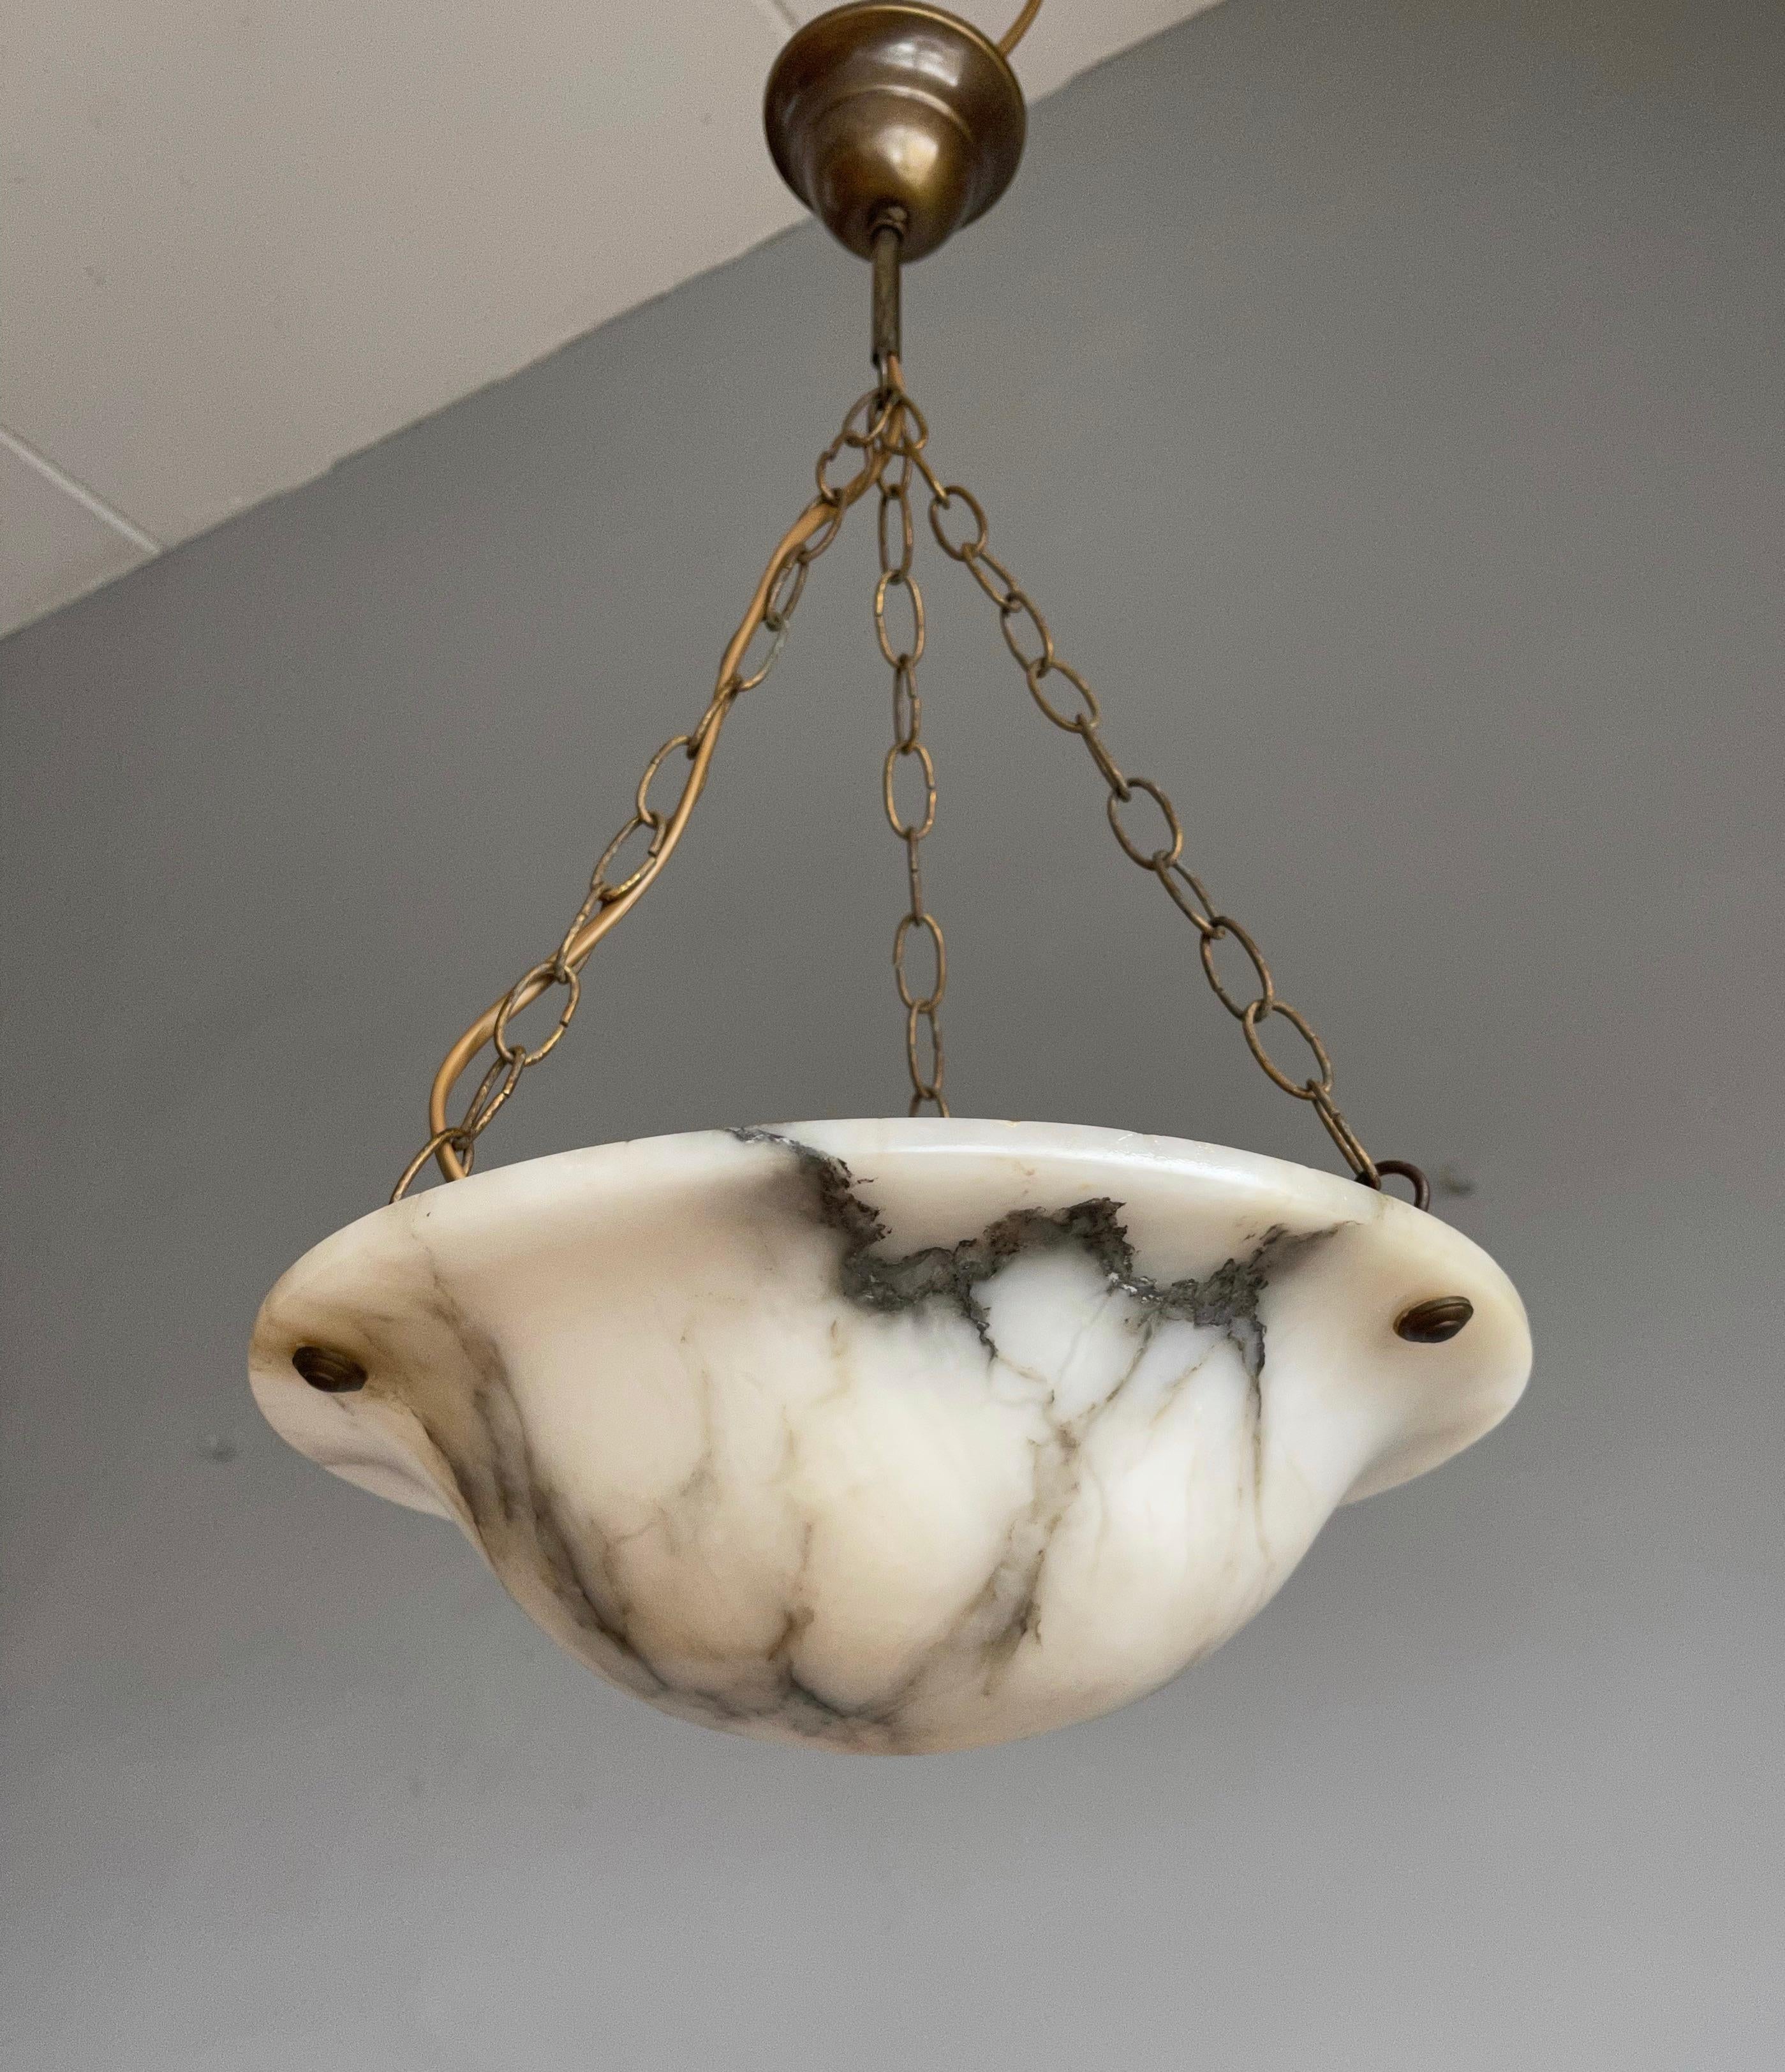 Antique Little White Alabaster Pendant Ceiling Lamp with a Brass Chain & Canopy 6